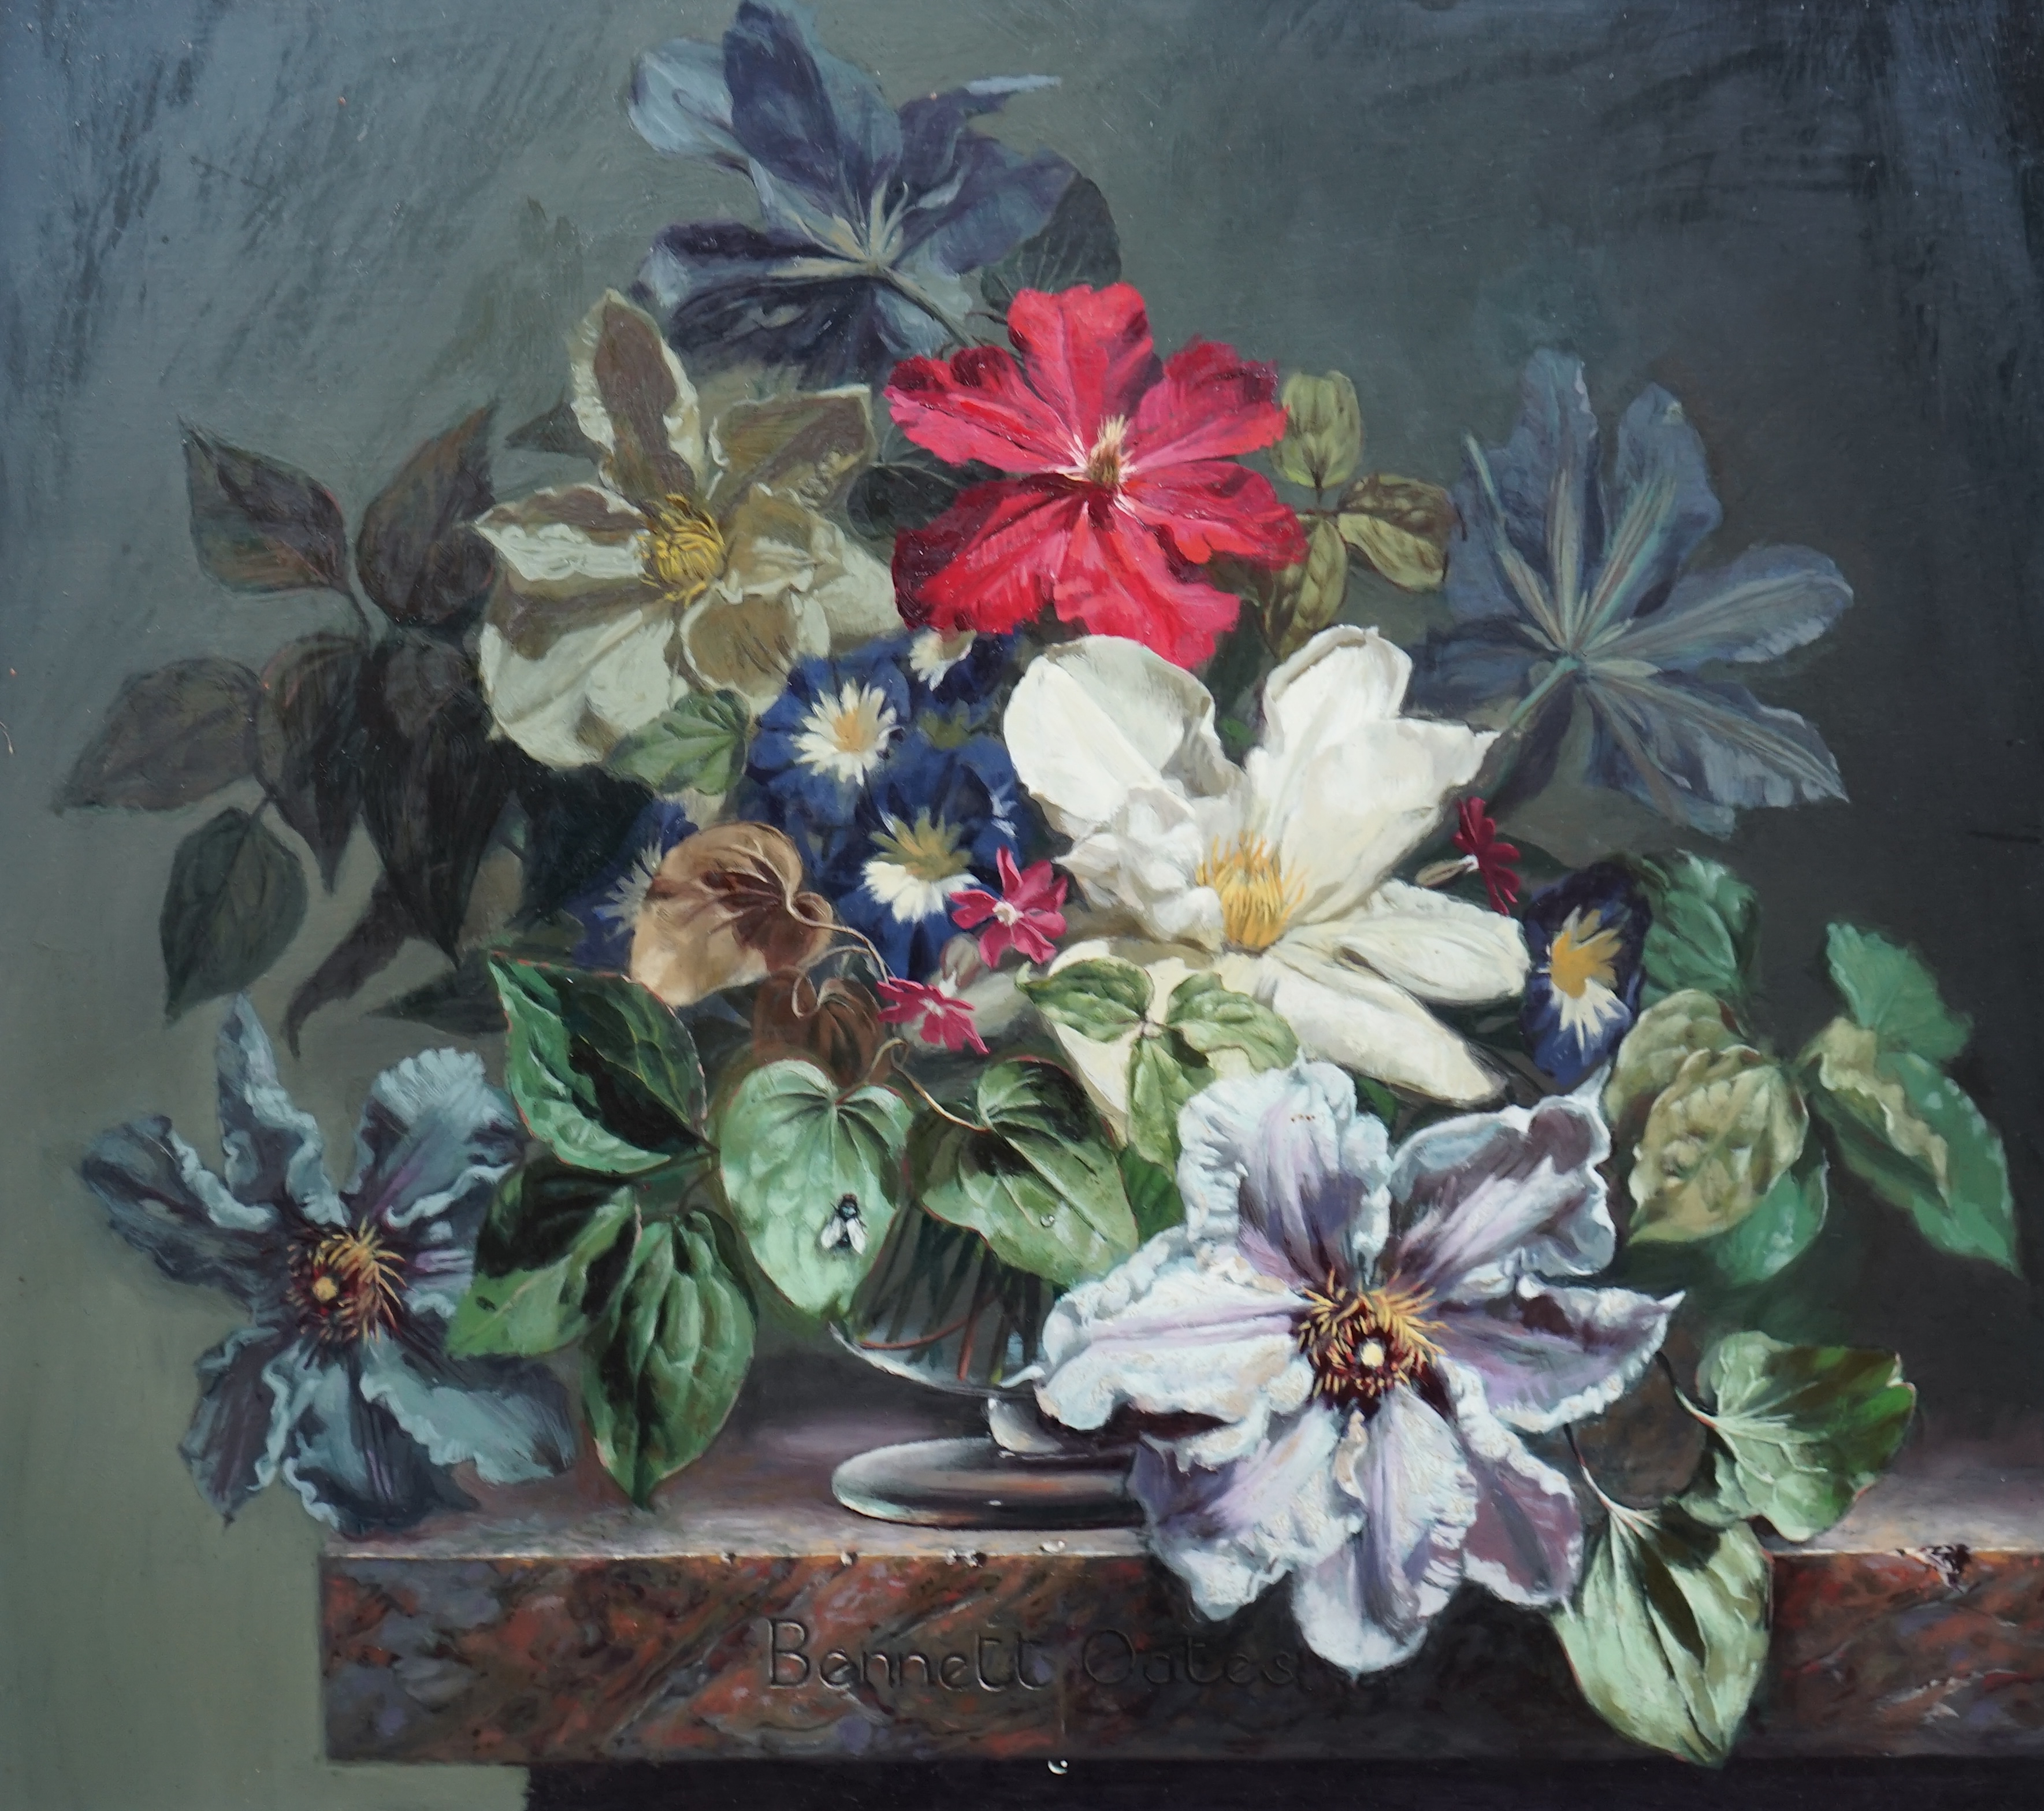 Bennett Oates (English, 1928-2009), 'Clematis and Convolvulus', oil on board, 40 x 45cm